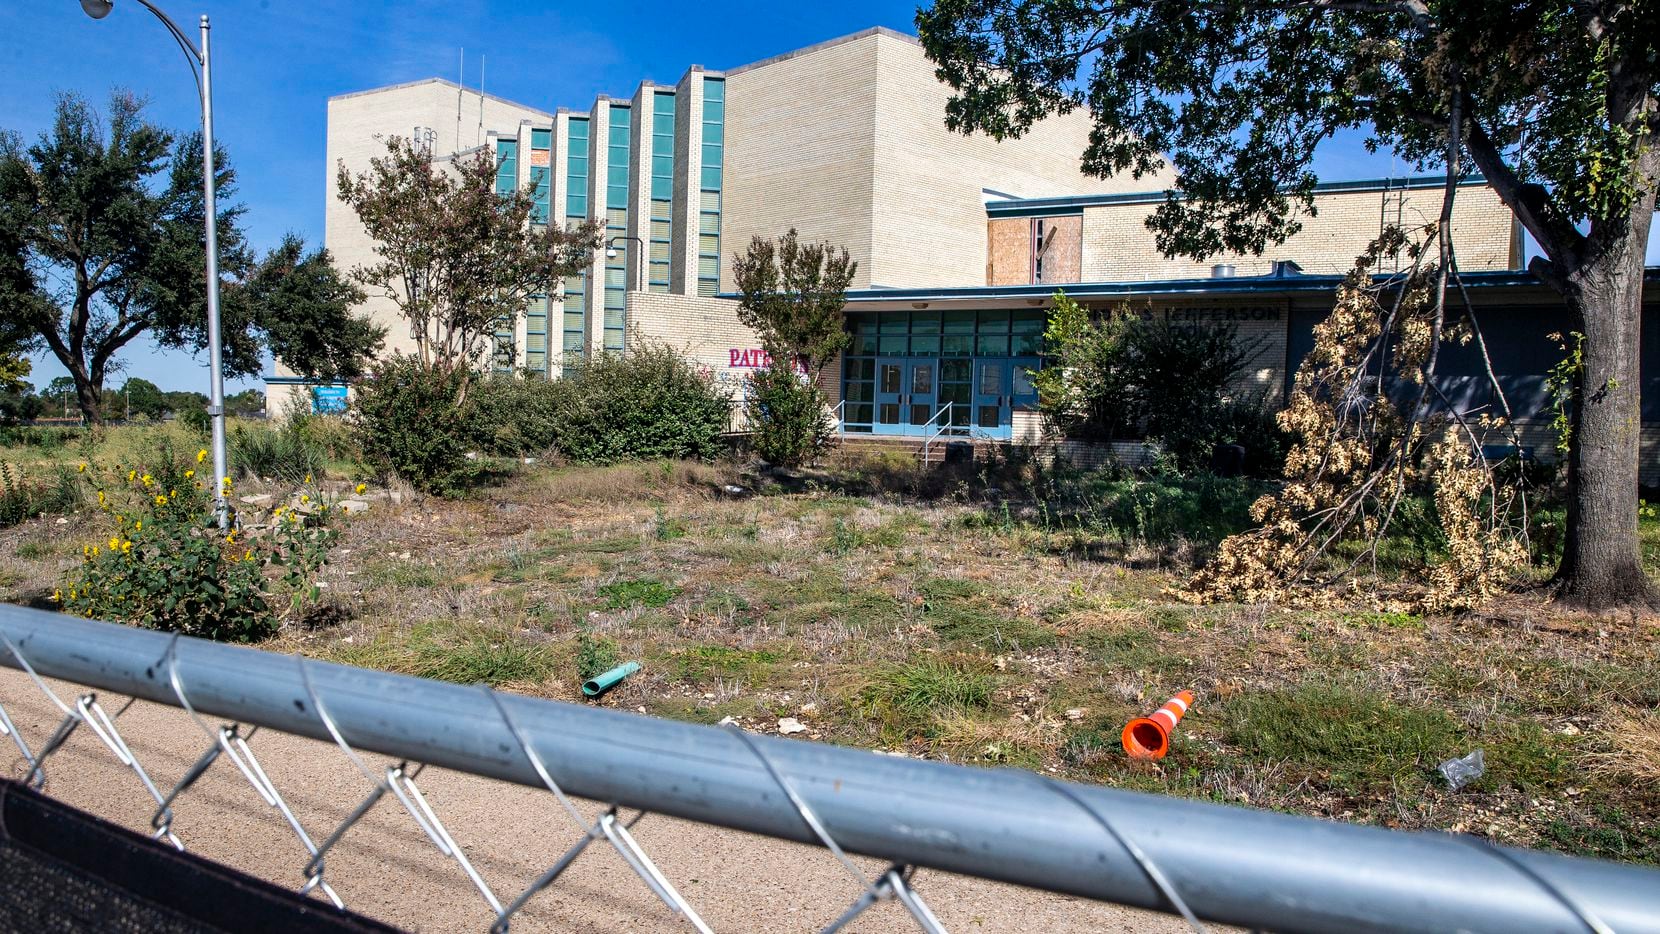 The dilapidated structure of Thomas Jefferson High School is photographed in Dallas on Friday, Oct. 16, 2020. The campus, along with Edward H. Cary Middle School, was destroyed by a tornado last October. The schools are still in desrepair, the latter having been demolished earlier this year, but the district says it's making some progress on renovating Thomas Jefferson High School. (Lynda M. González/The Dallas Morning News)